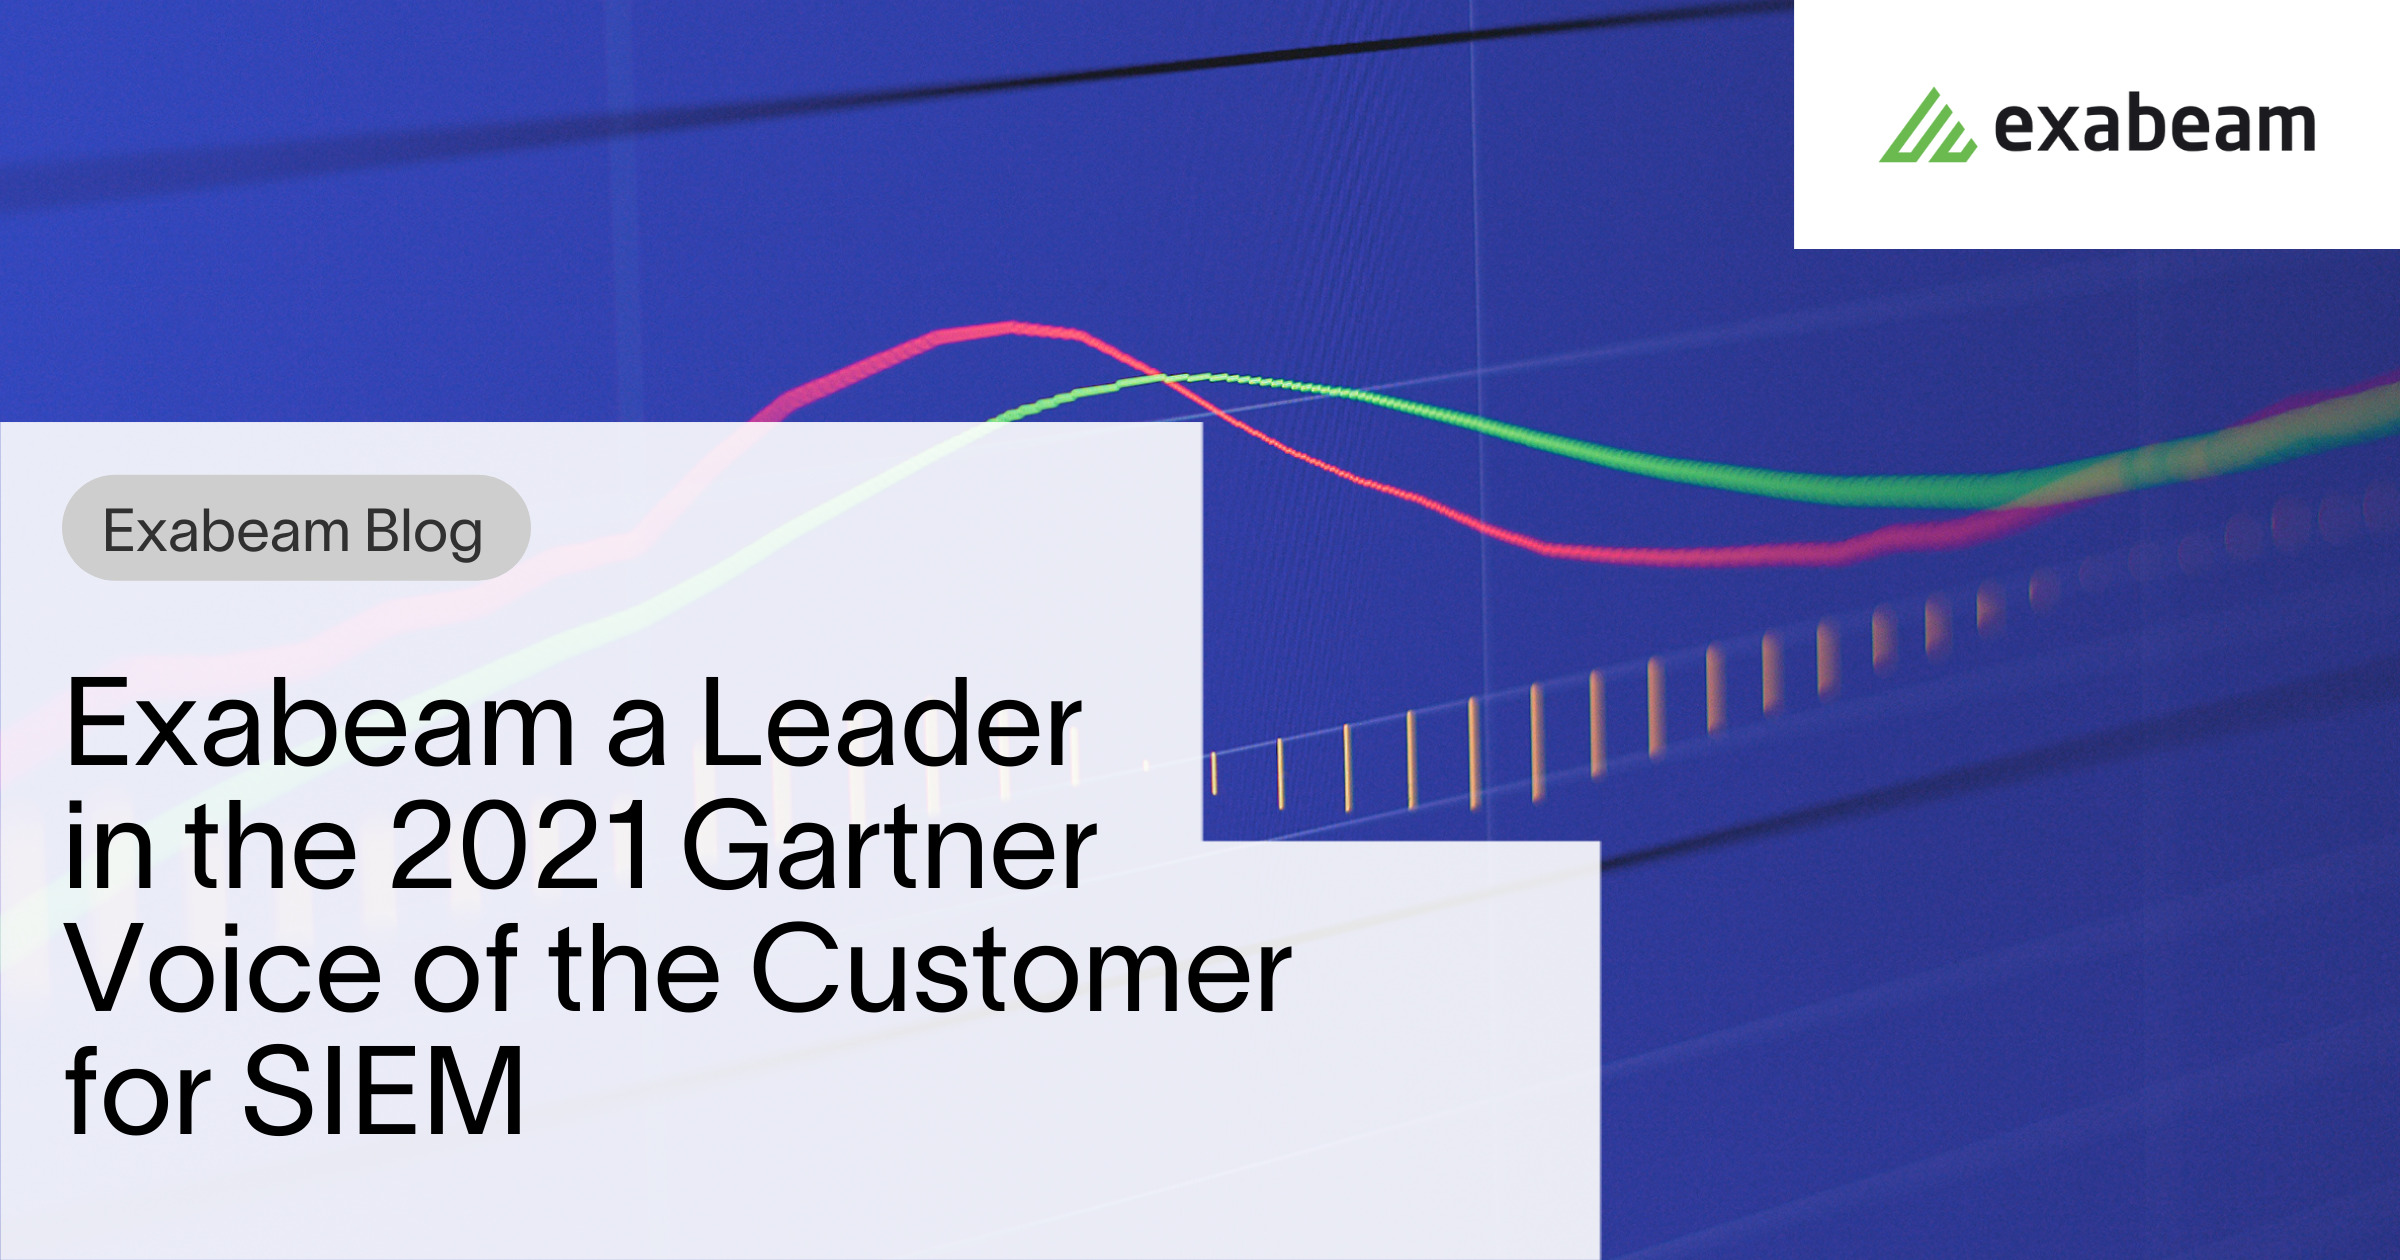 Exabeam a Leader in the 2021 Gartner Voice of the Customer for SIEM